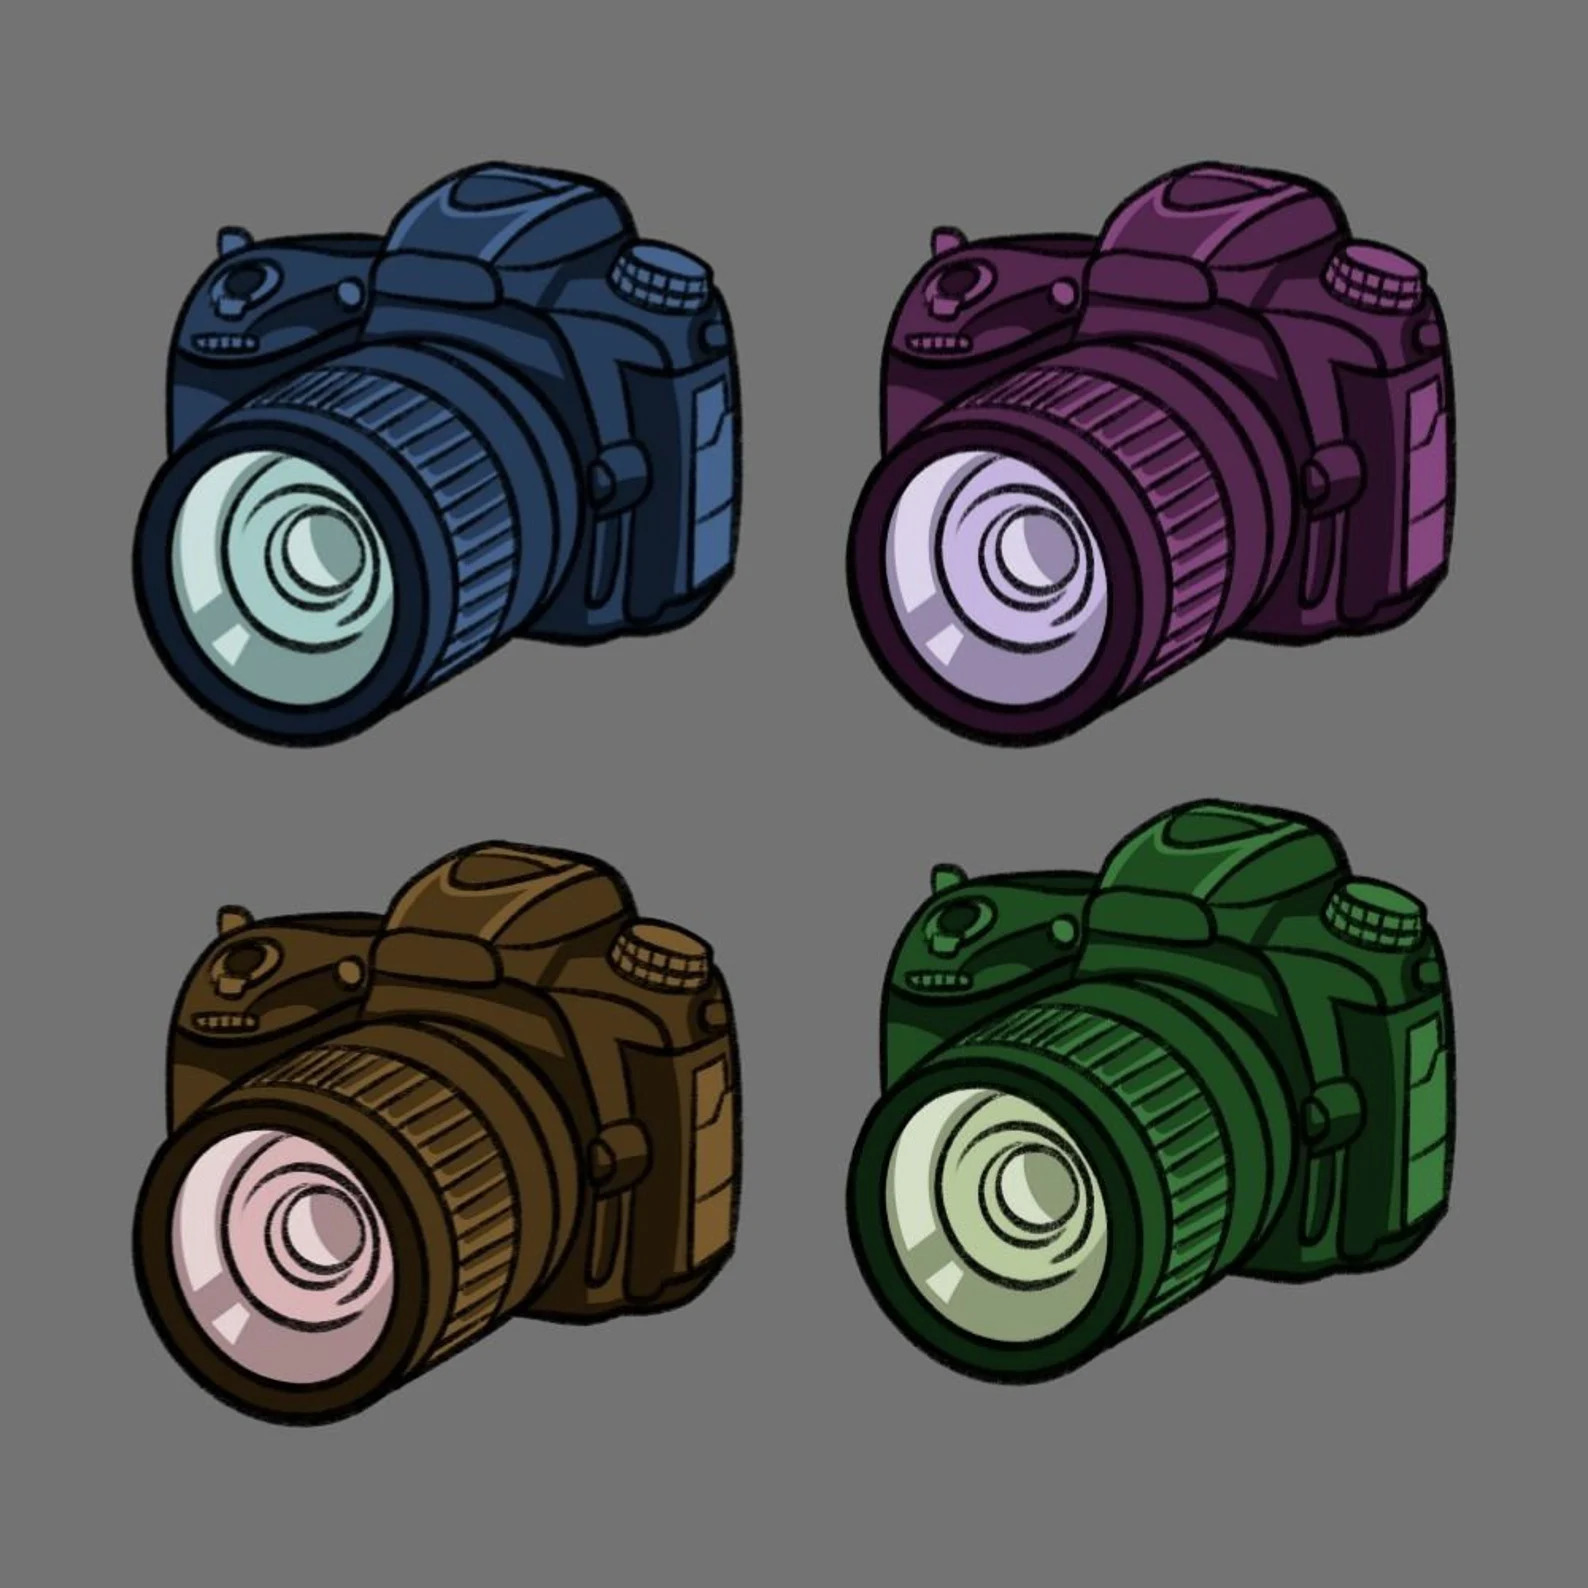 So cool camera in the different colors.